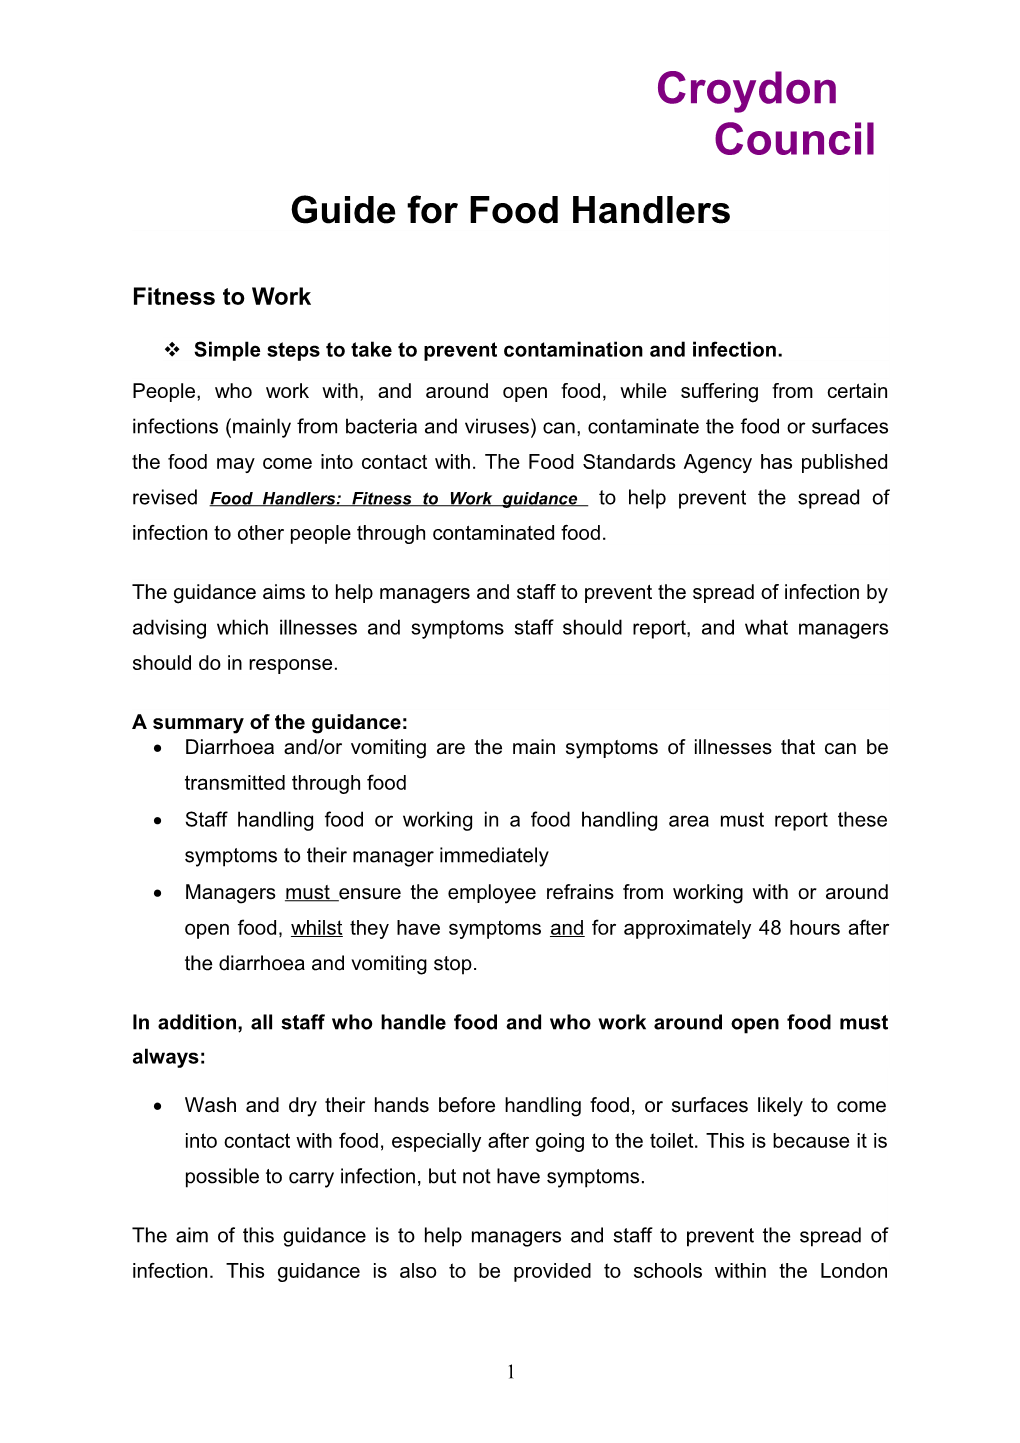 Guide for Food Handlers: Fitness to Work Simple Steps to Take to Prevent Contamination